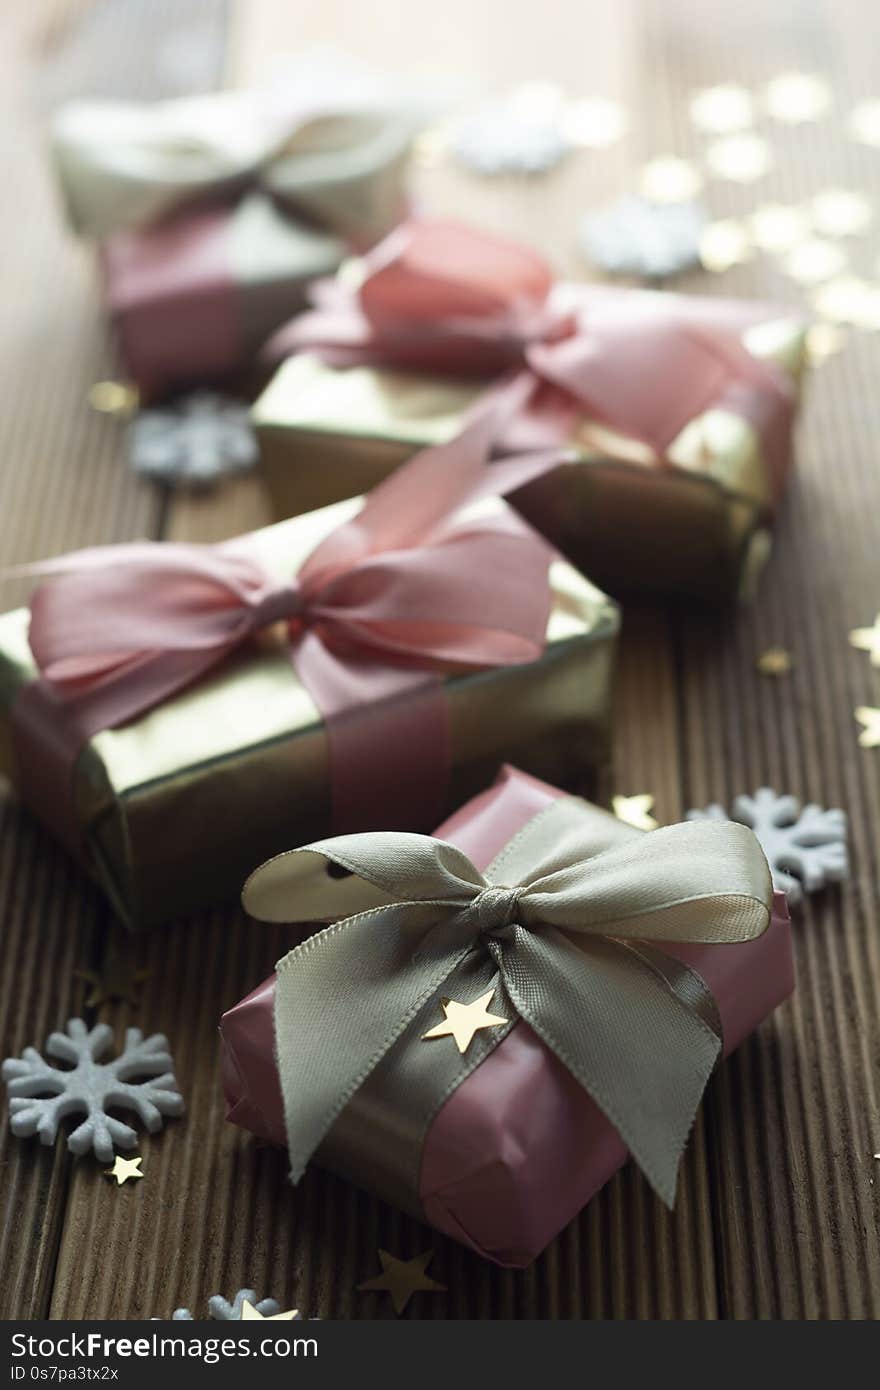 Golden gifts Christmas, party, birthday background. Celebrate shinny surprise boxes copy space wooden background, pink, ribbon, bow, sparkling, shopping, snowflakes, conffeti, globes, bubble, winter, isolated, present, celebration, decoration, holiday, valentine, wrap, give, package, anniversary, many, occasion, event, luxury, beautiful, greeting, new, year, packaging, parcel, card, decorative, happy, object, packet. Golden gifts Christmas, party, birthday background. Celebrate shinny surprise boxes copy space wooden background, pink, ribbon, bow, sparkling, shopping, snowflakes, conffeti, globes, bubble, winter, isolated, present, celebration, decoration, holiday, valentine, wrap, give, package, anniversary, many, occasion, event, luxury, beautiful, greeting, new, year, packaging, parcel, card, decorative, happy, object, packet